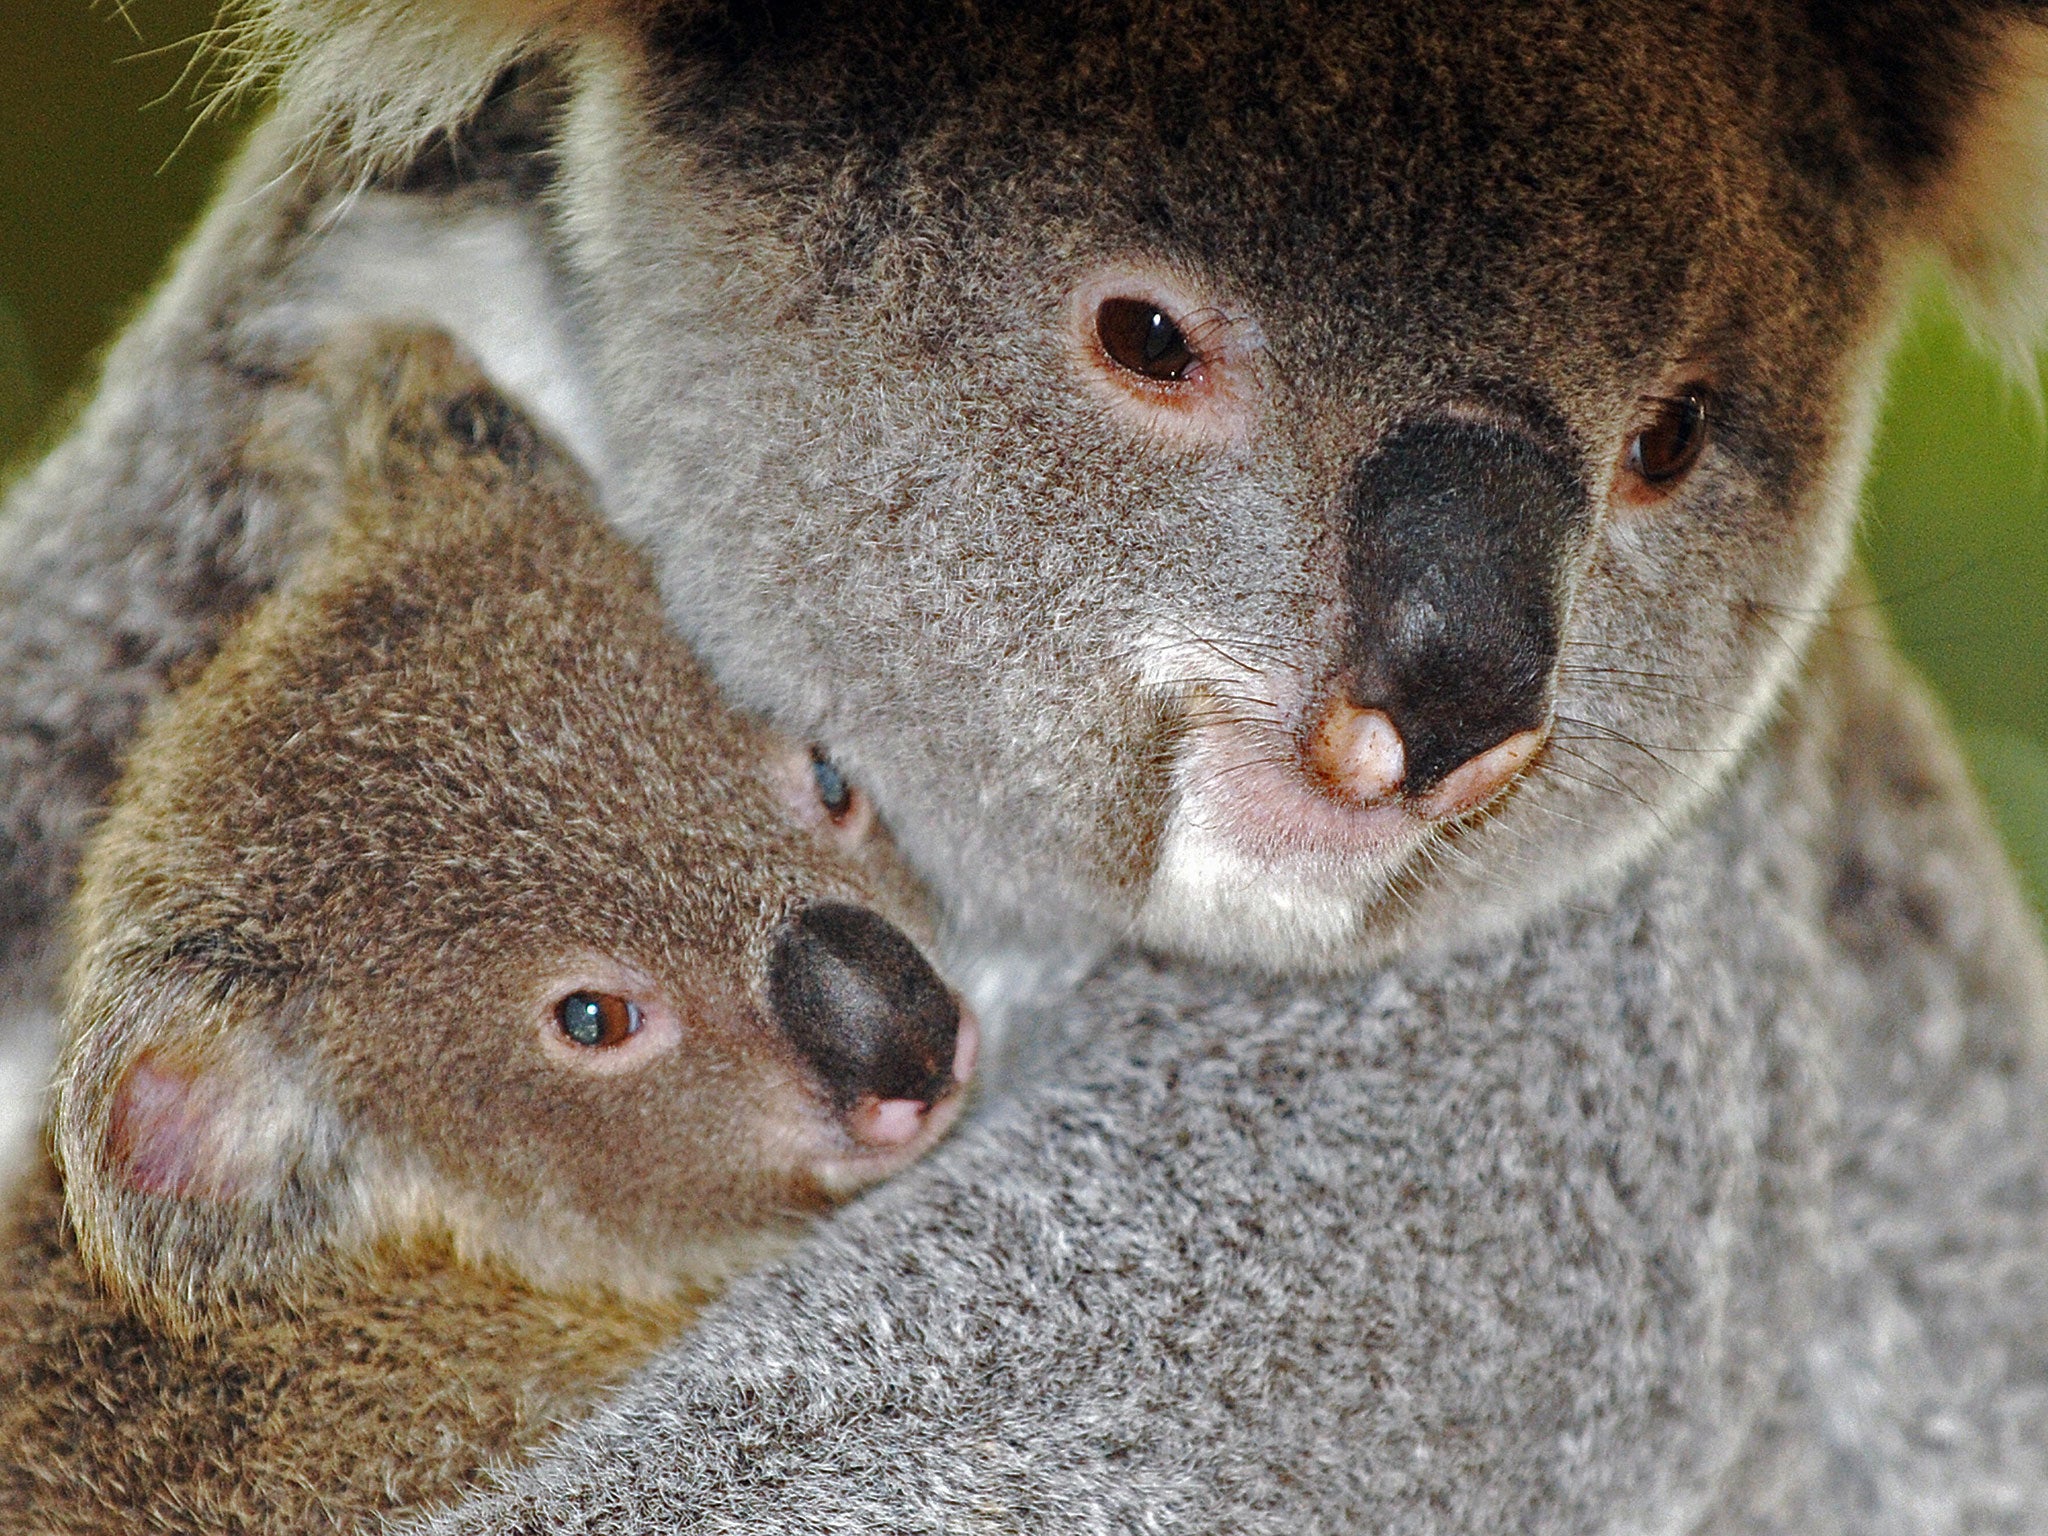 A mother and baby Koala cling to each other.